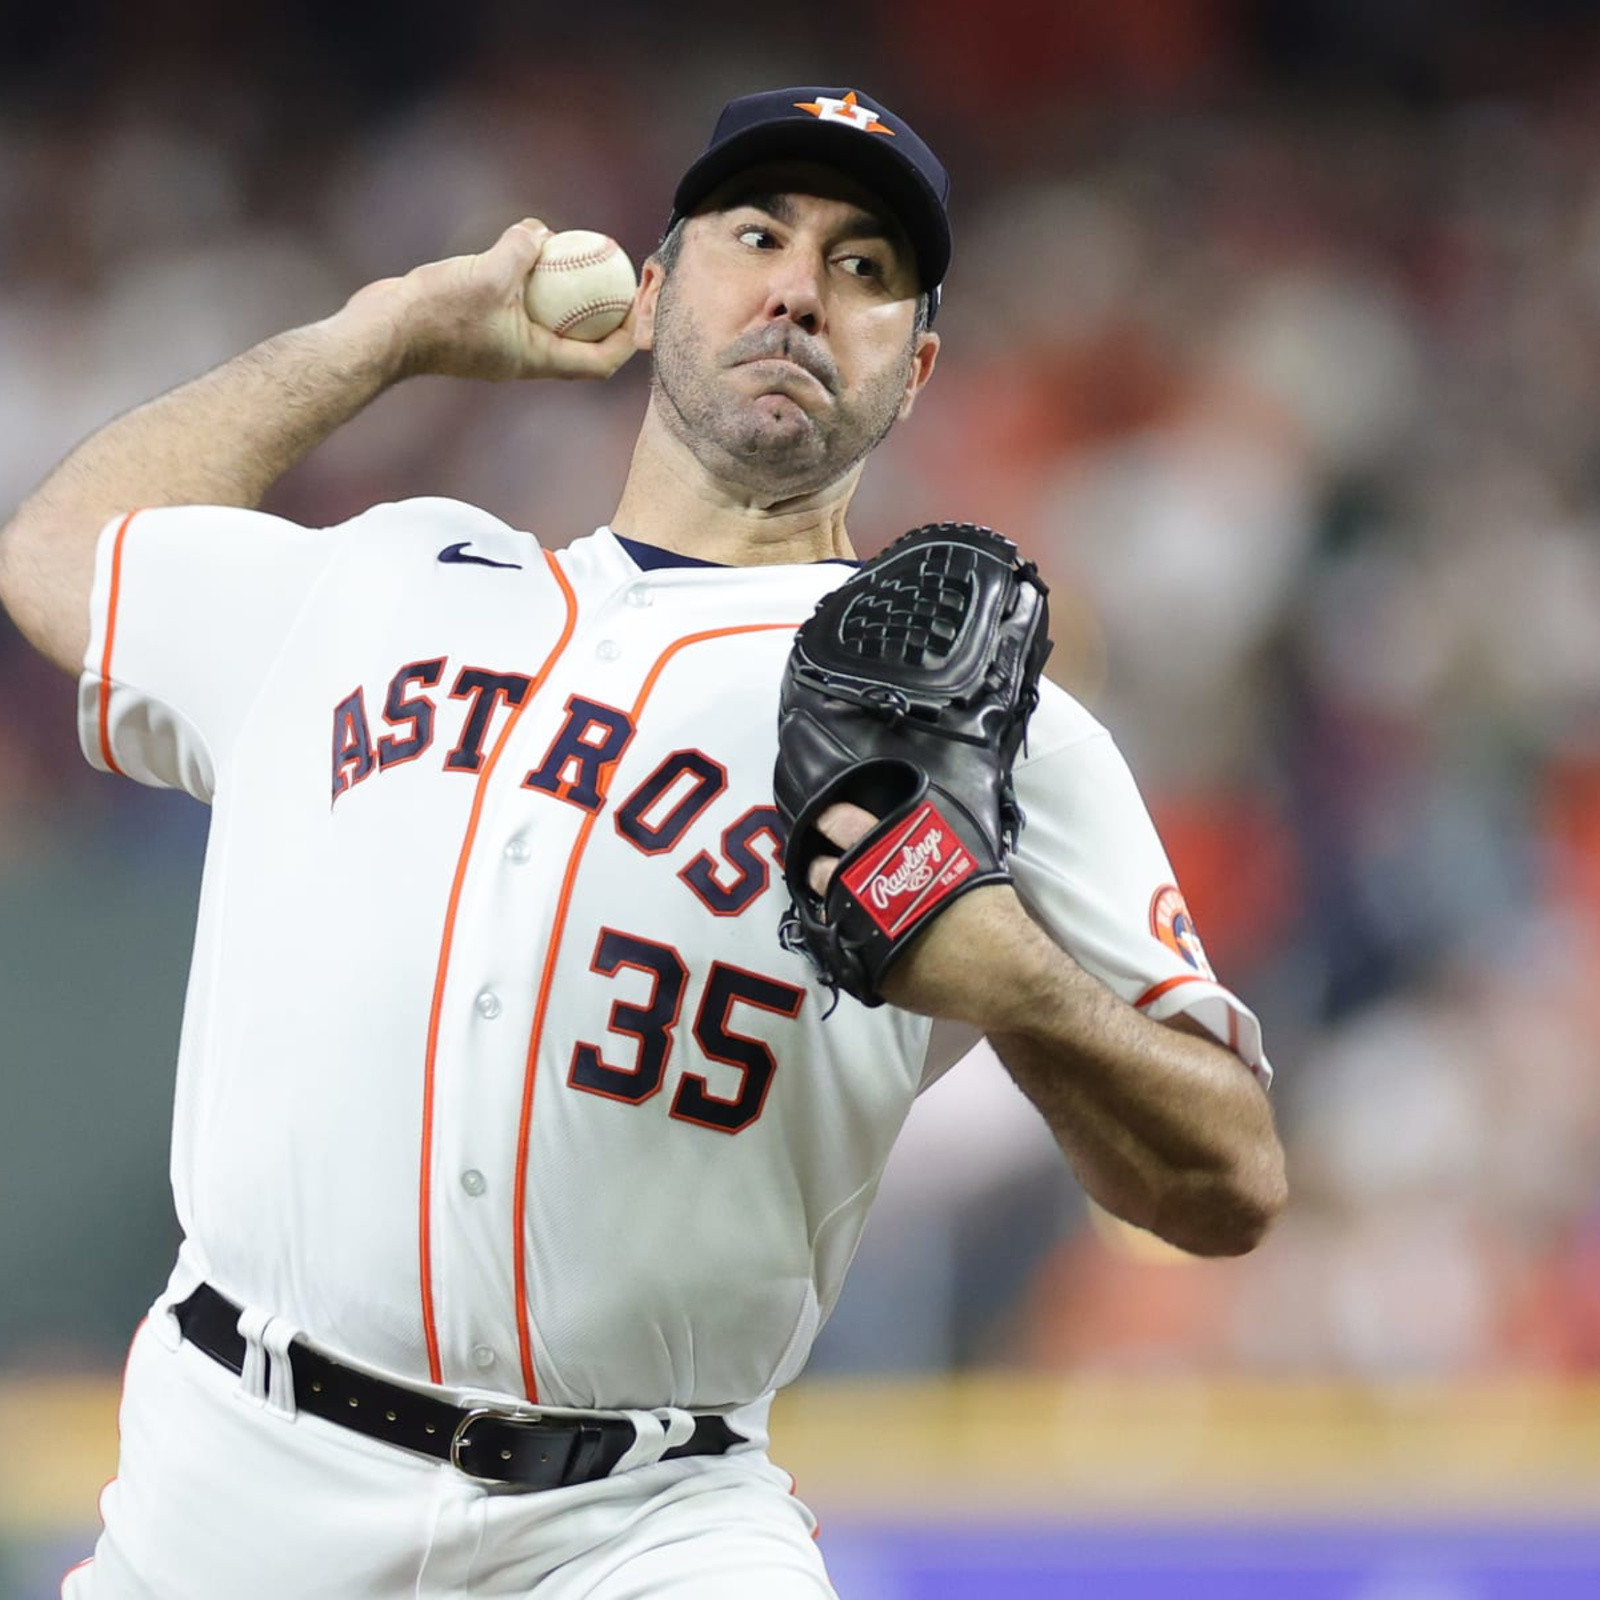 SF Giants: Flores hasn't fallen out of favor despite lack of playing time